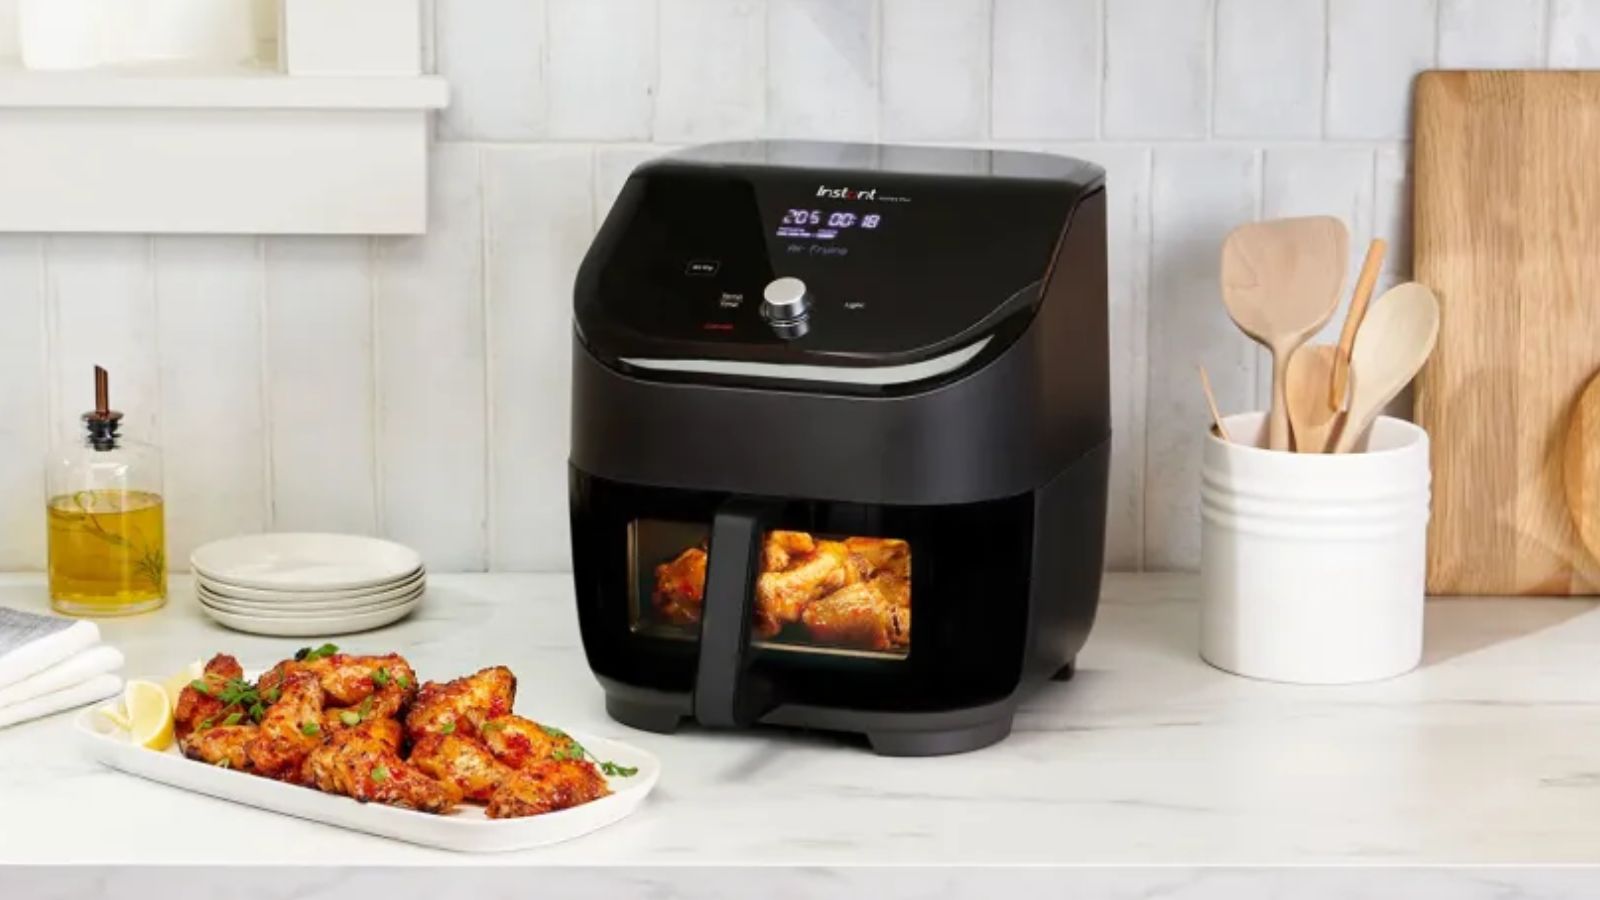 The 15 Best Cyber Monday Air Fryer Deals: Ninja, Breville, and